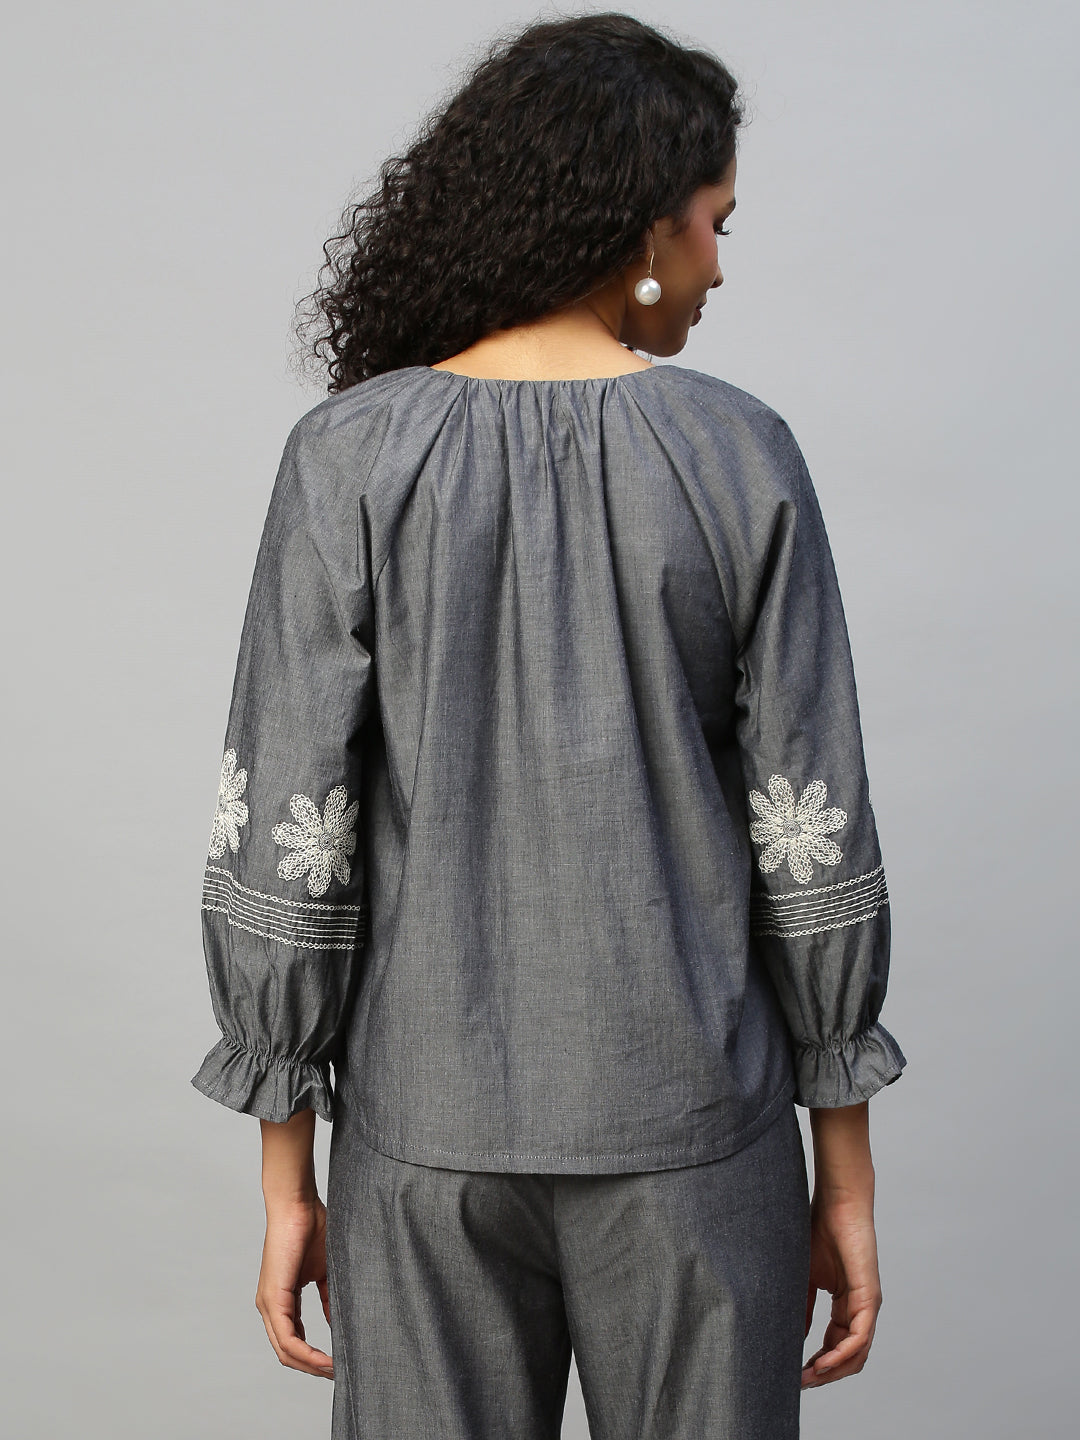 Charocoal Chambray Embroidered Tunic Top